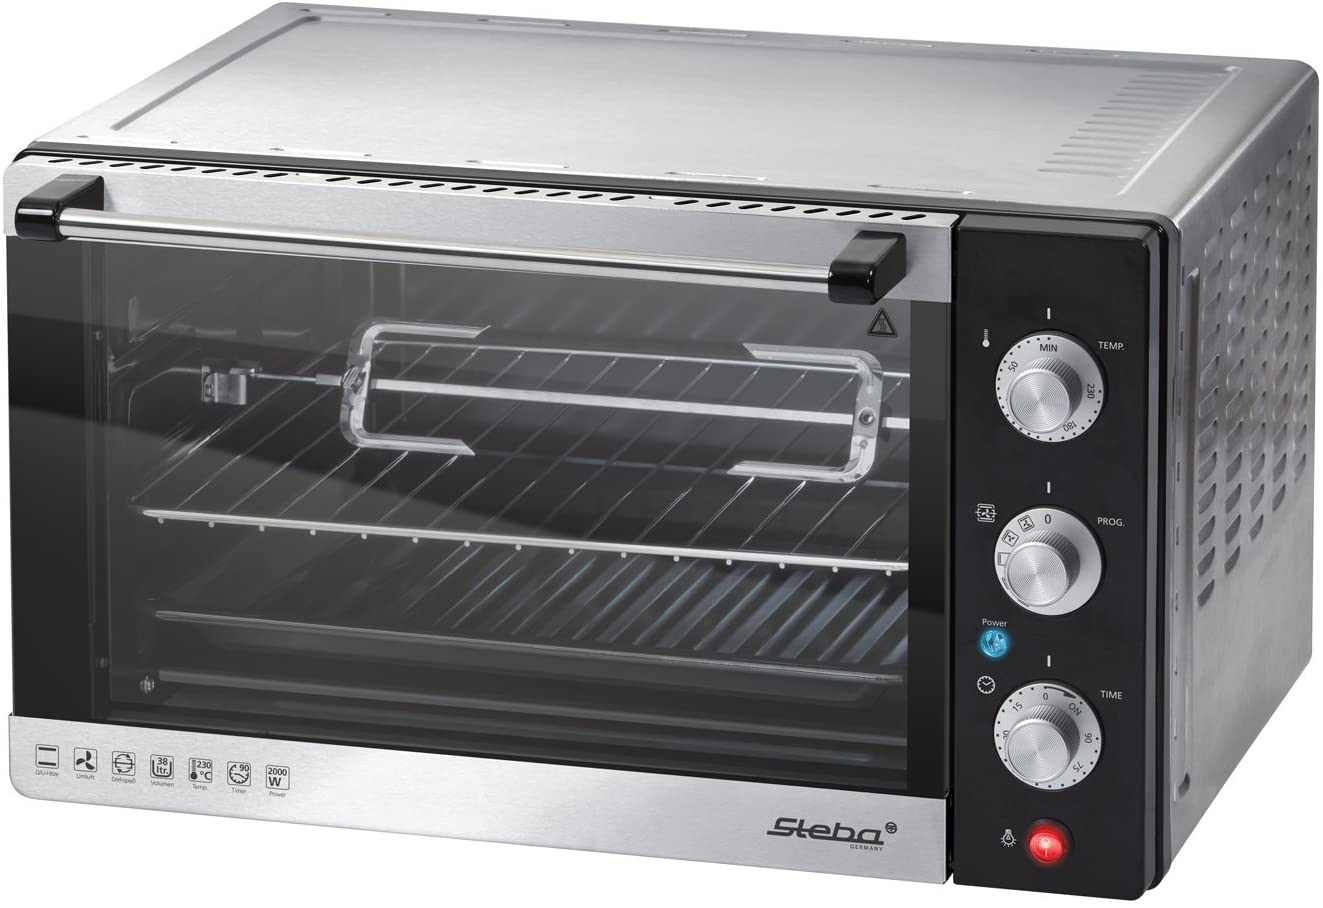 Steba KB 41 Grill and Bake Oven, 2000 W, Stainless Steel